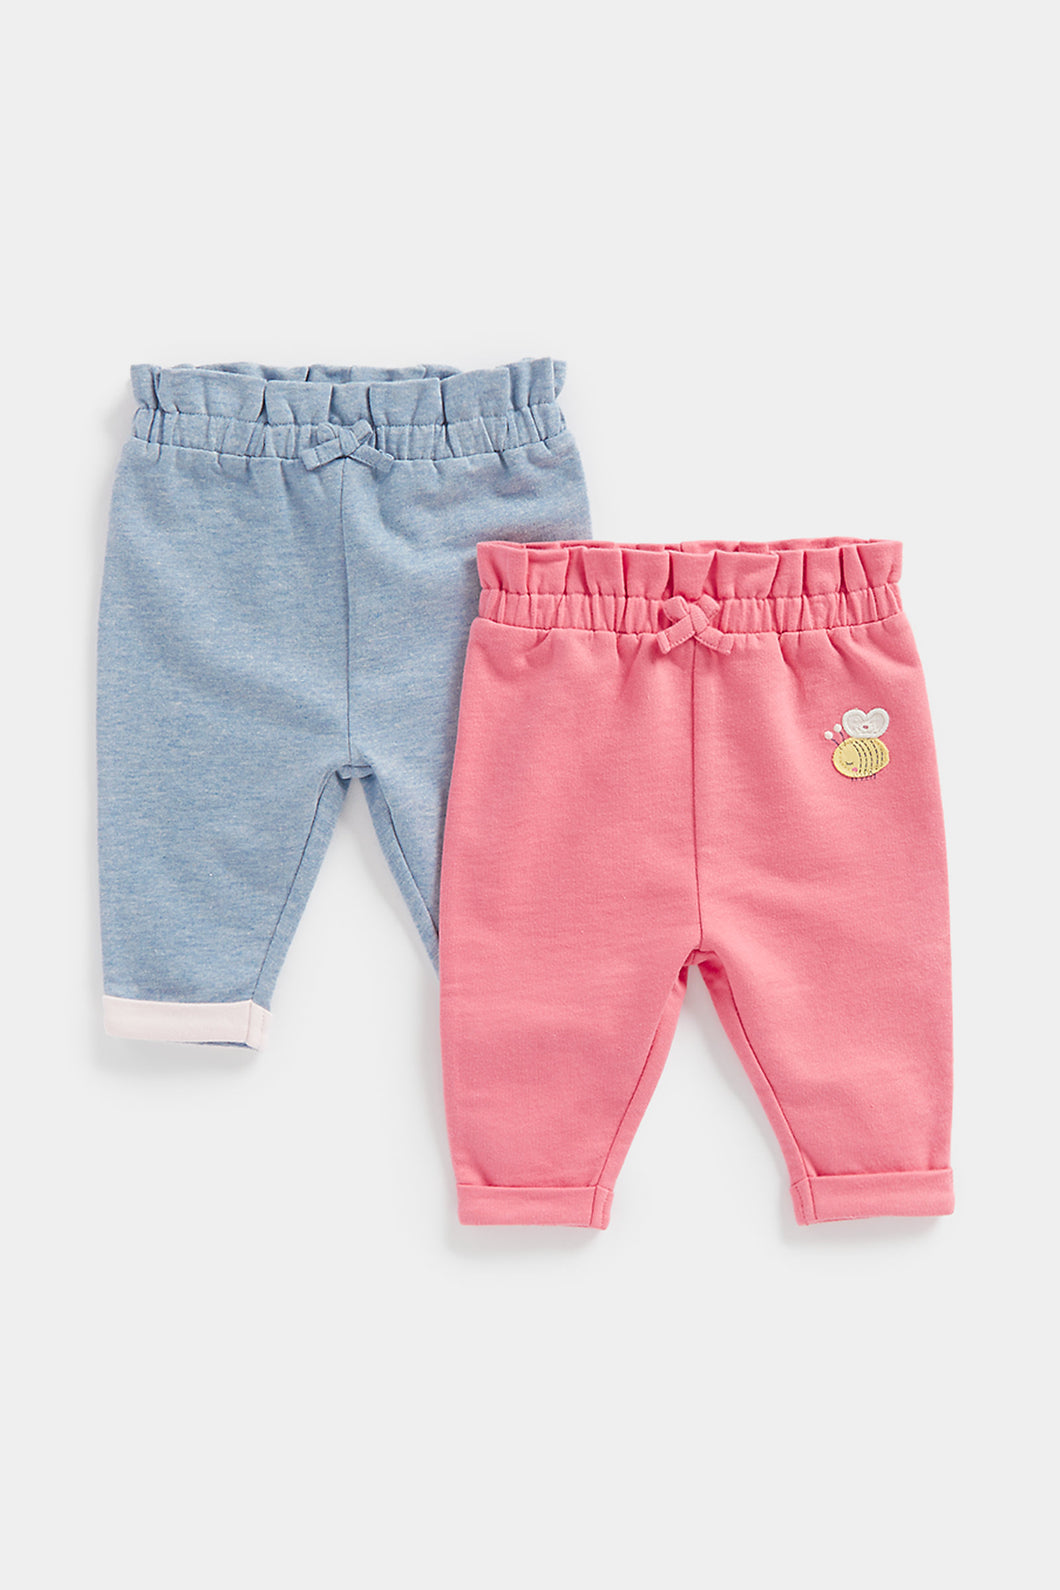 Mothercare Busy Garden Joggers - 2 Pack